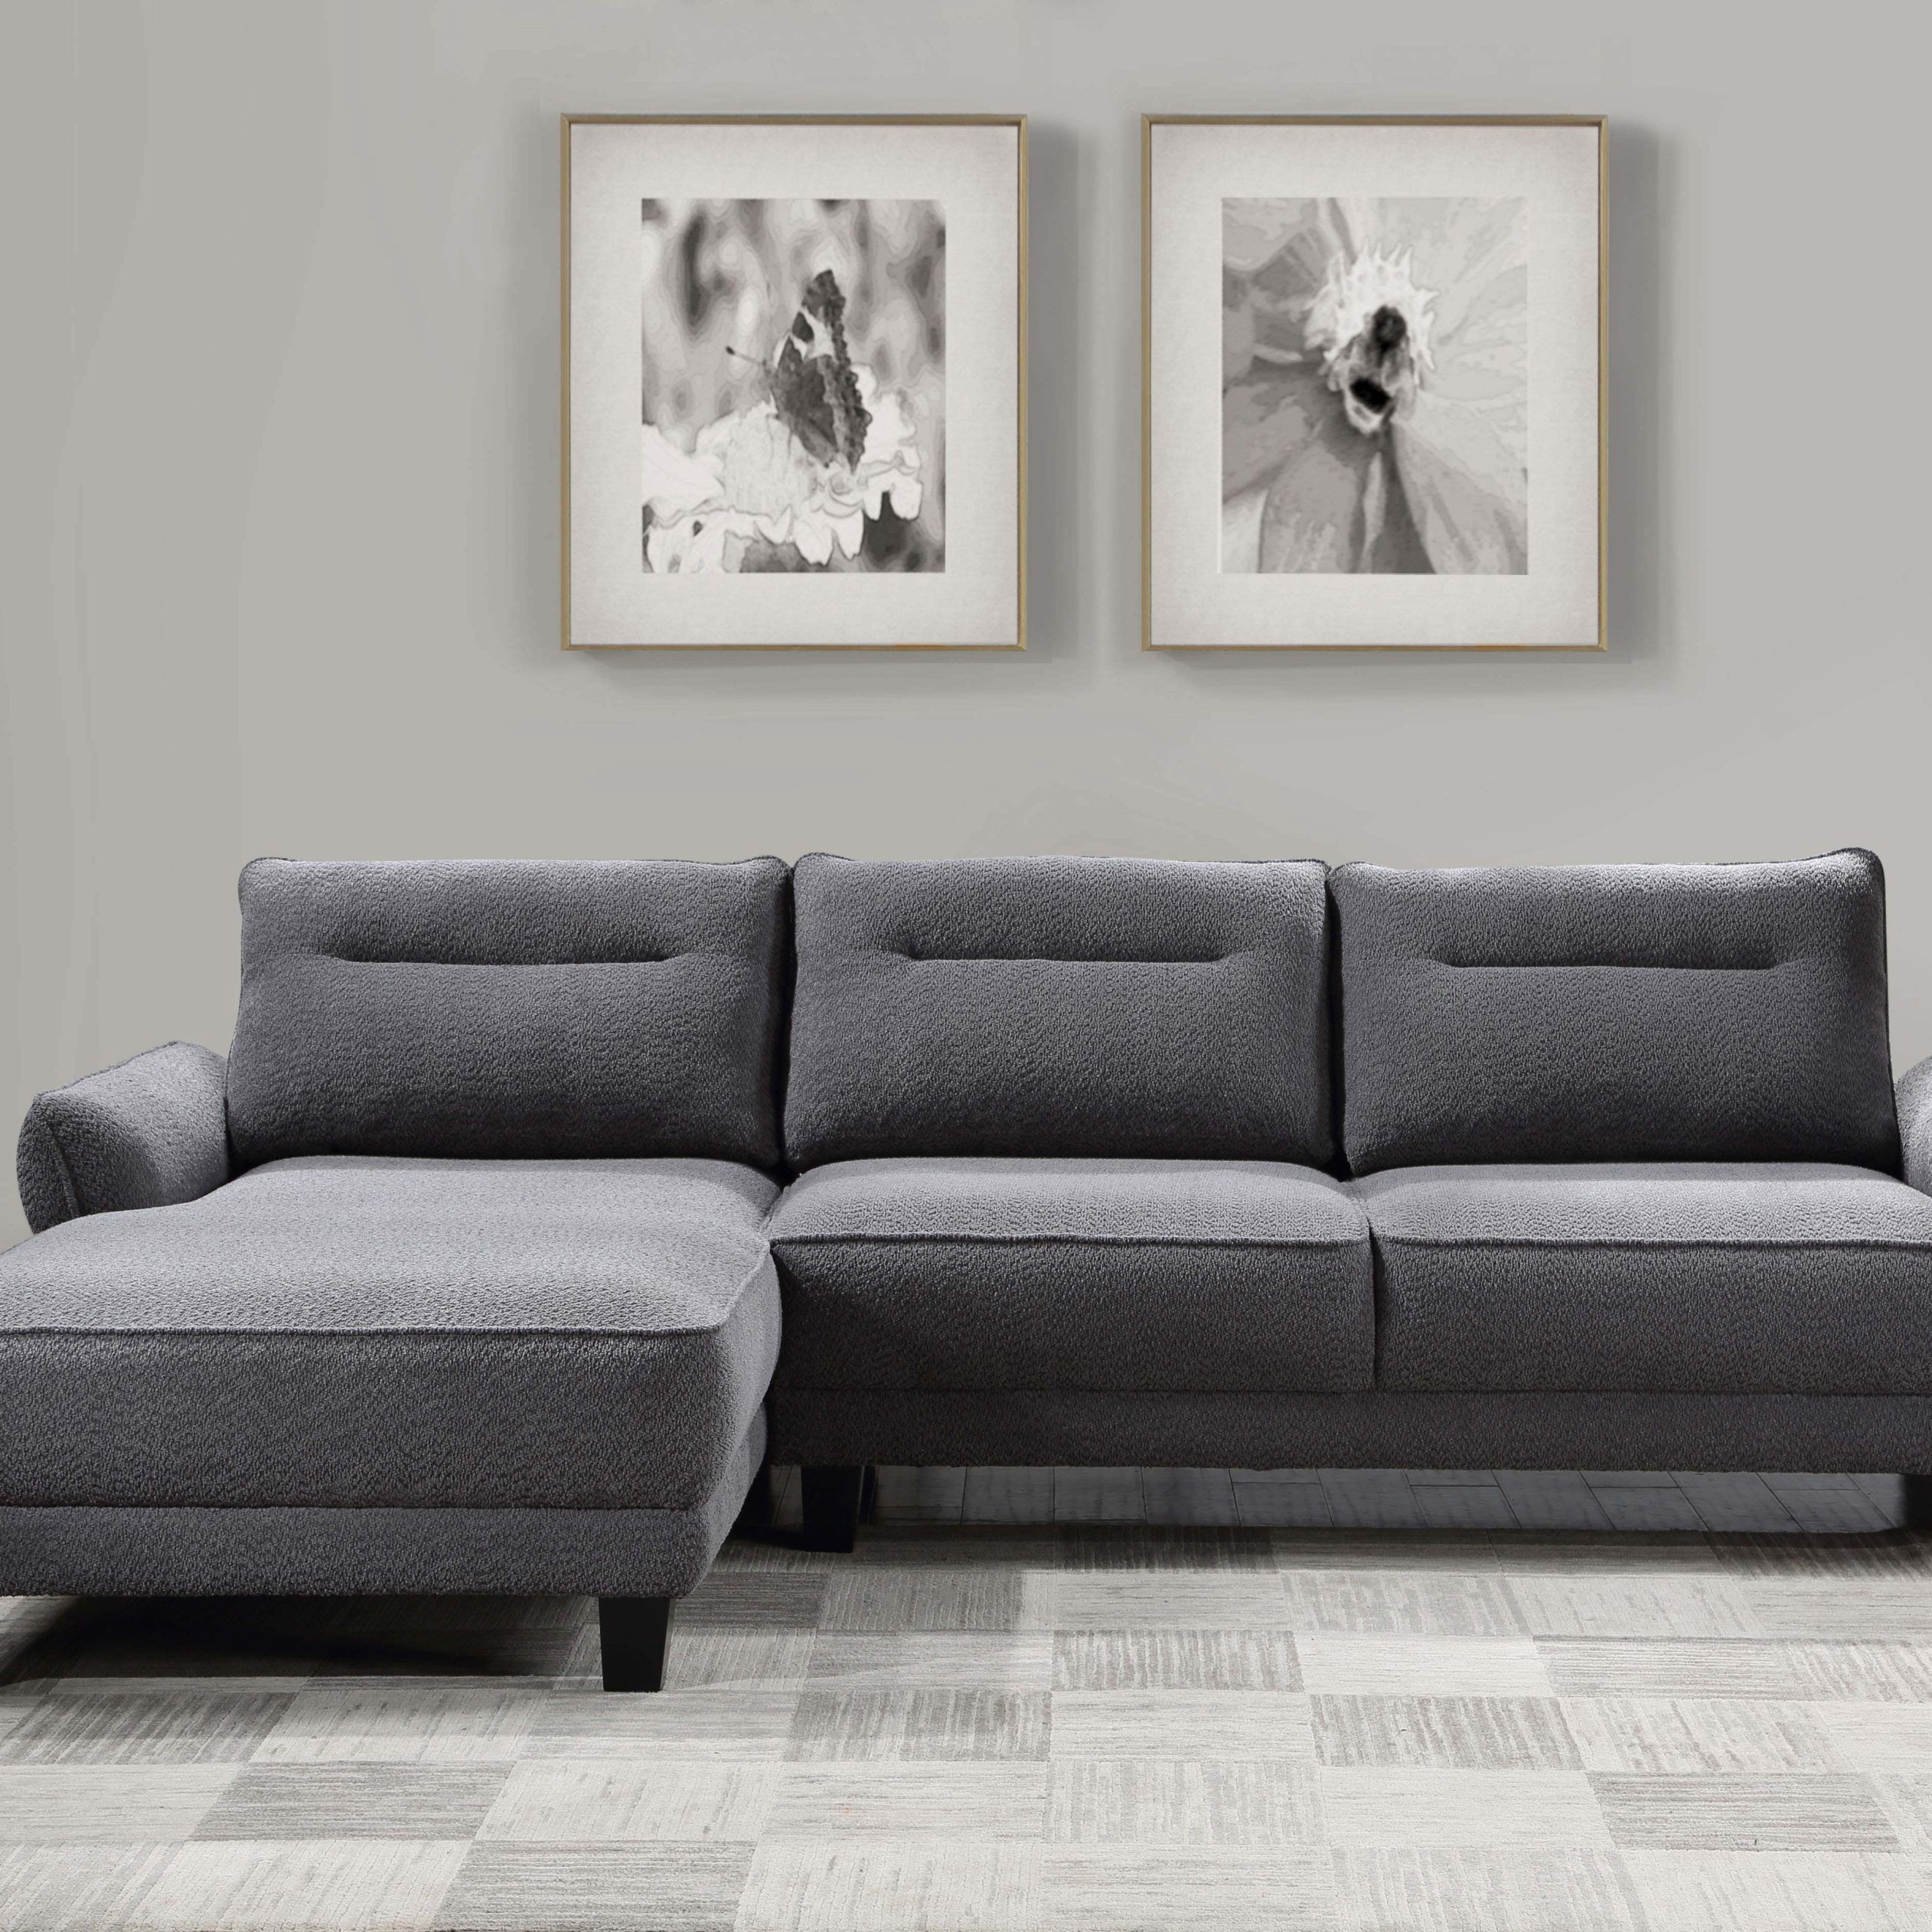 Caspian Upholstered Curved Arms Sectional Sofa Grey – Coaste Pertaining To Sofas With Curved Arms (View 14 of 15)